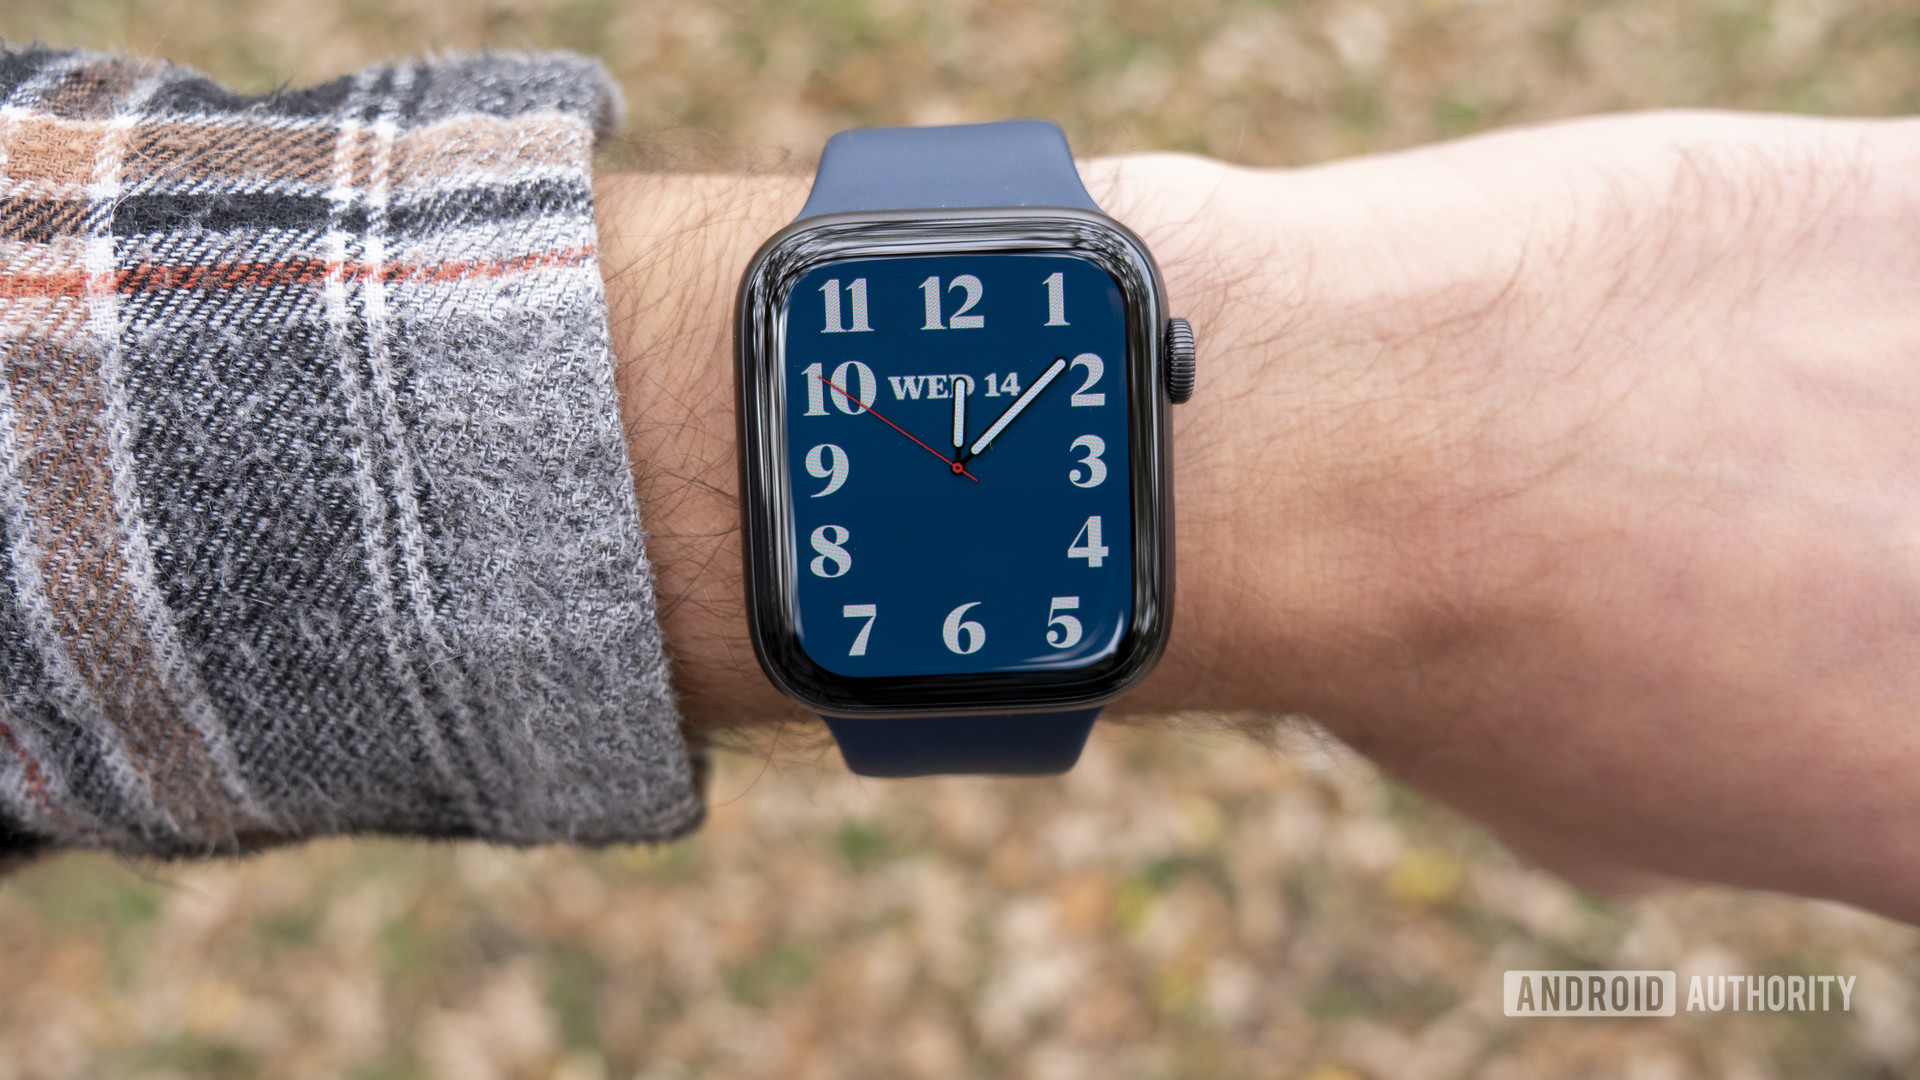 Apple Watch Series 6 and SE buyer's guide: What you need to know